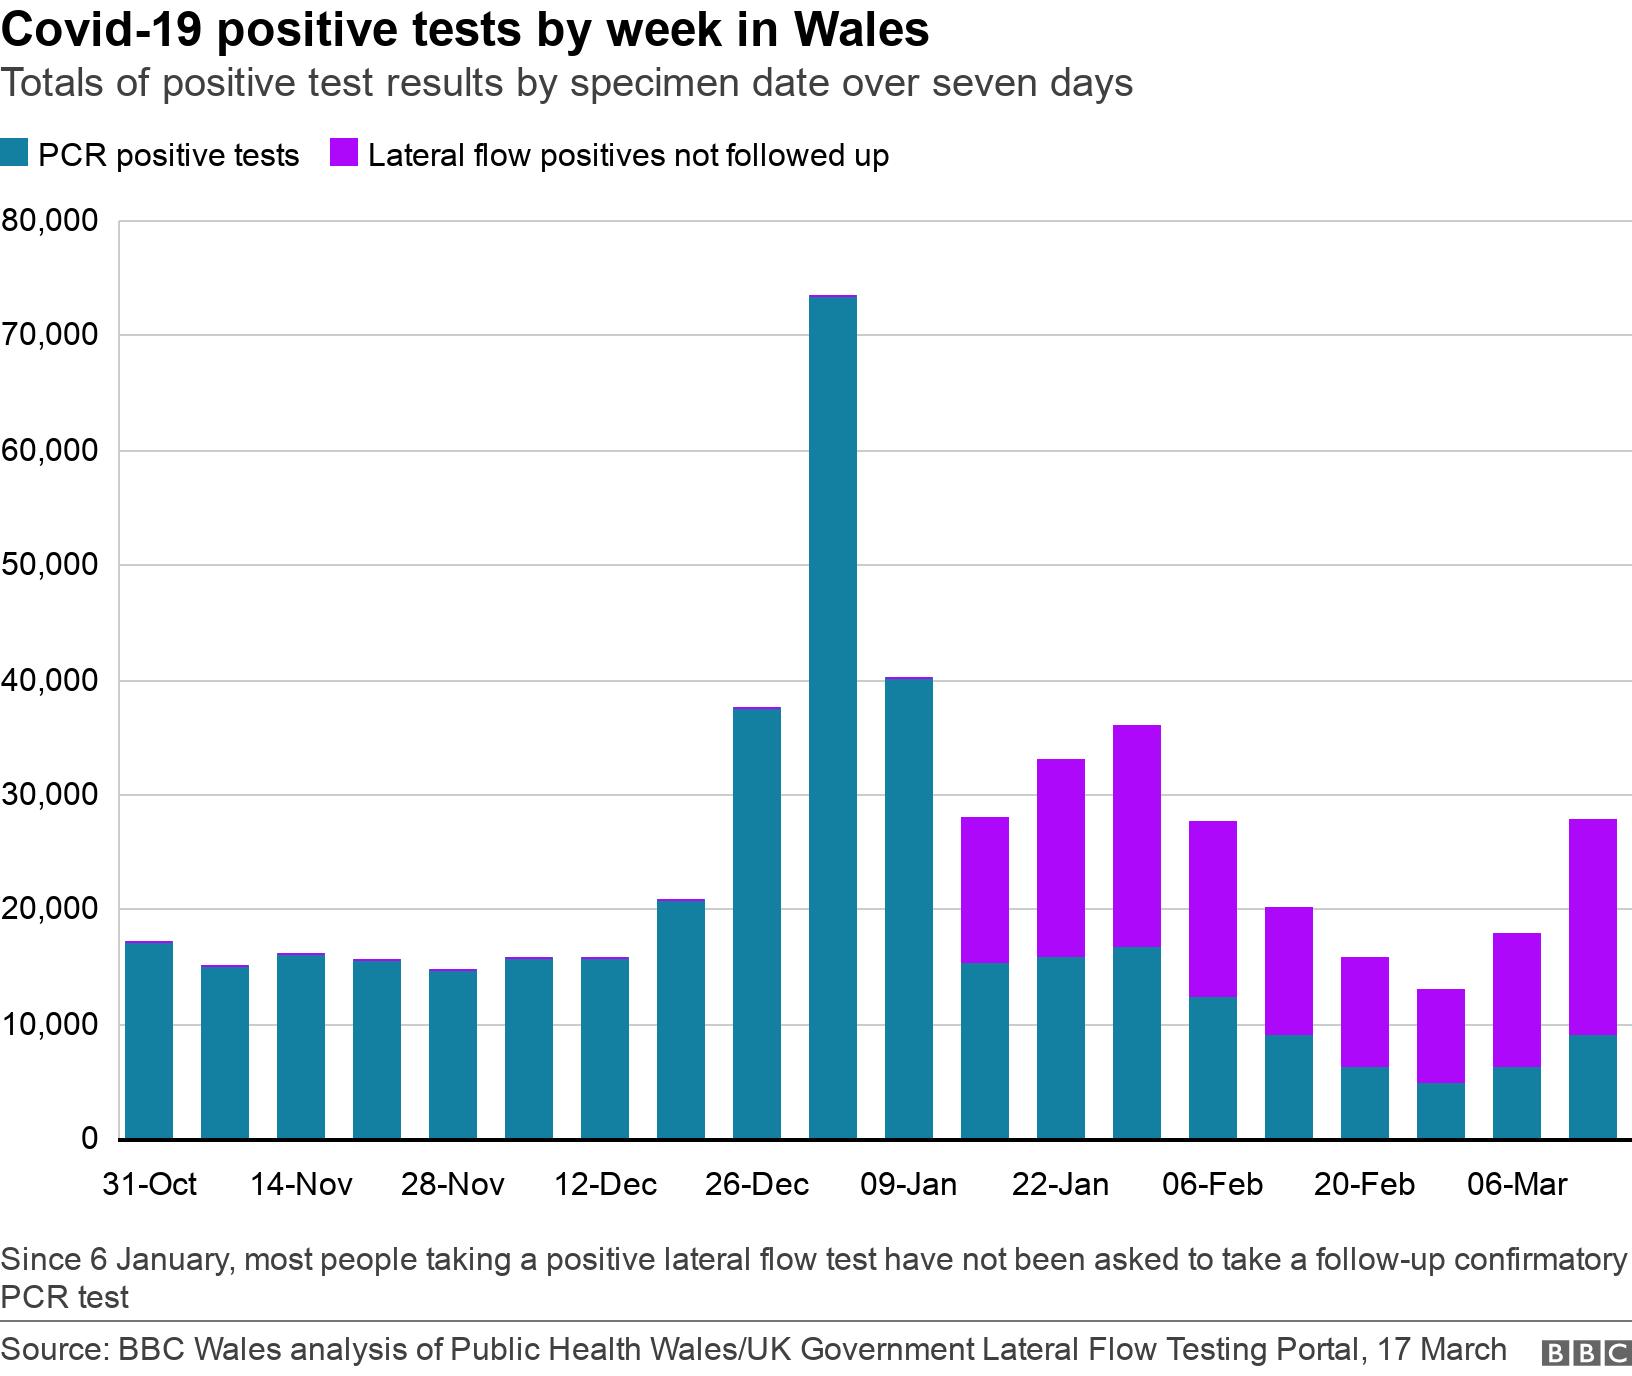 Covid-19 positive tests by week in Wales. Totals of positive test results by specimen date over seven days. Since 6 January, most people taking a positive lateral flow test have not been asked to take a follow-up confirmatory PCR test.